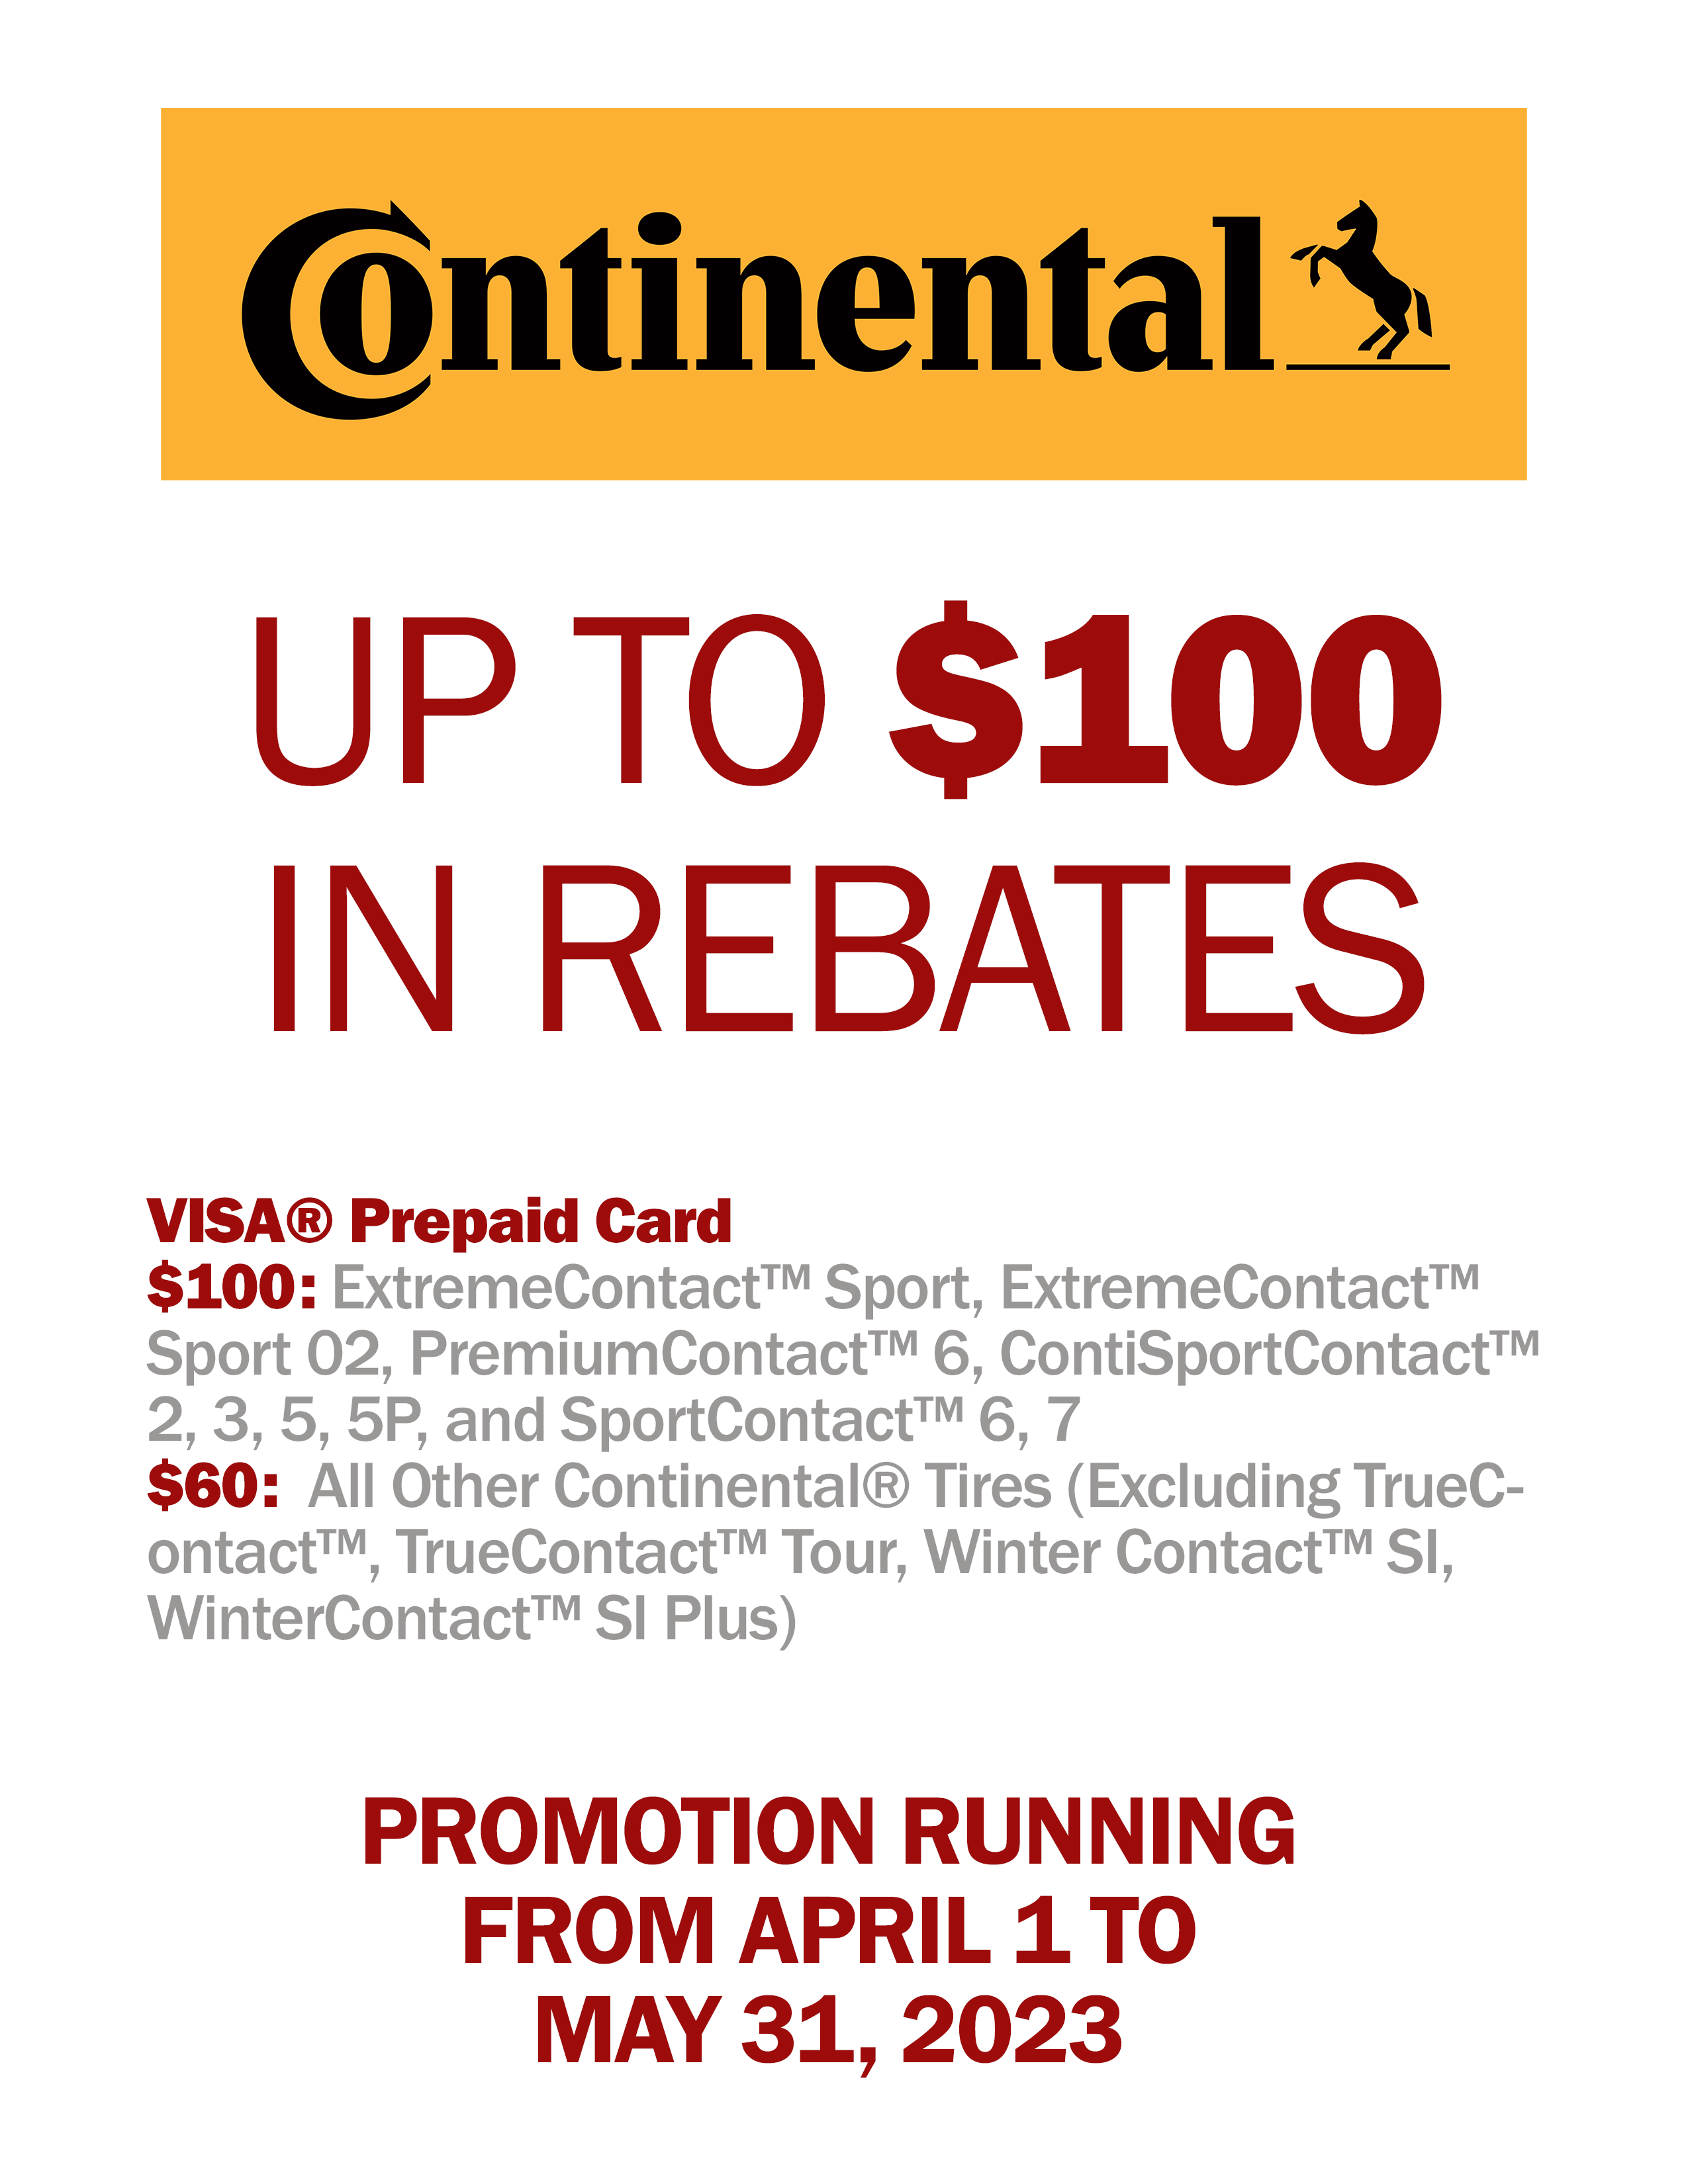 continental-spring-2023-rebate-downtown-auto-specialist